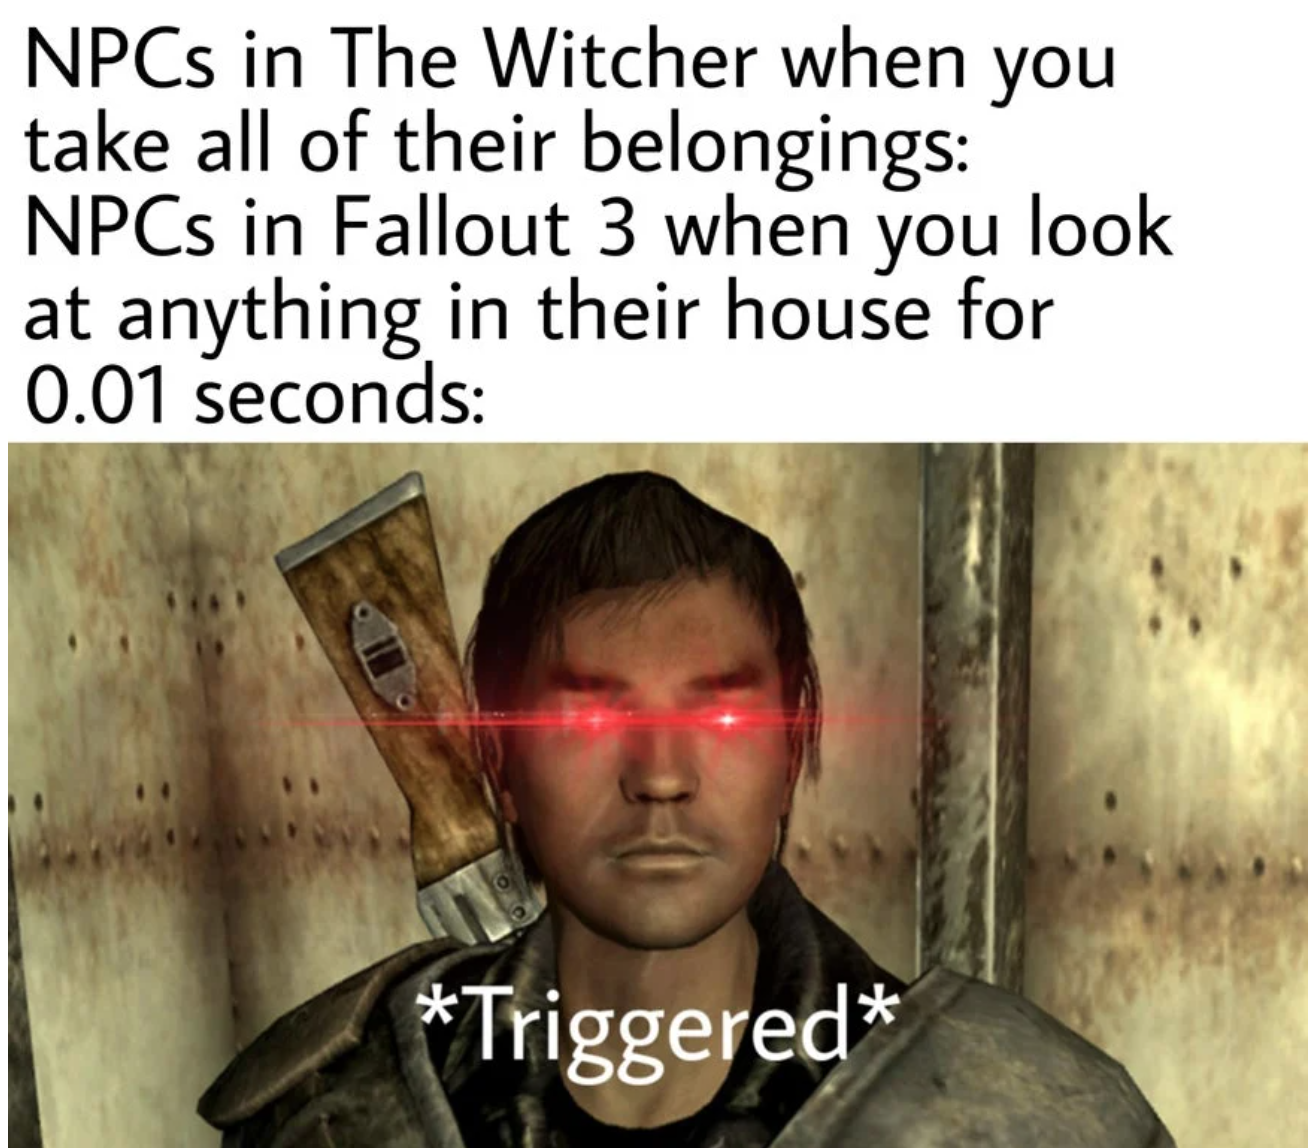 funny gaming memes - agente bcp - NPCs in The Witcher when you take all of their belongings NPCs in Fallout 3 when you look at anything in their house for 0.01 seconds Triggered